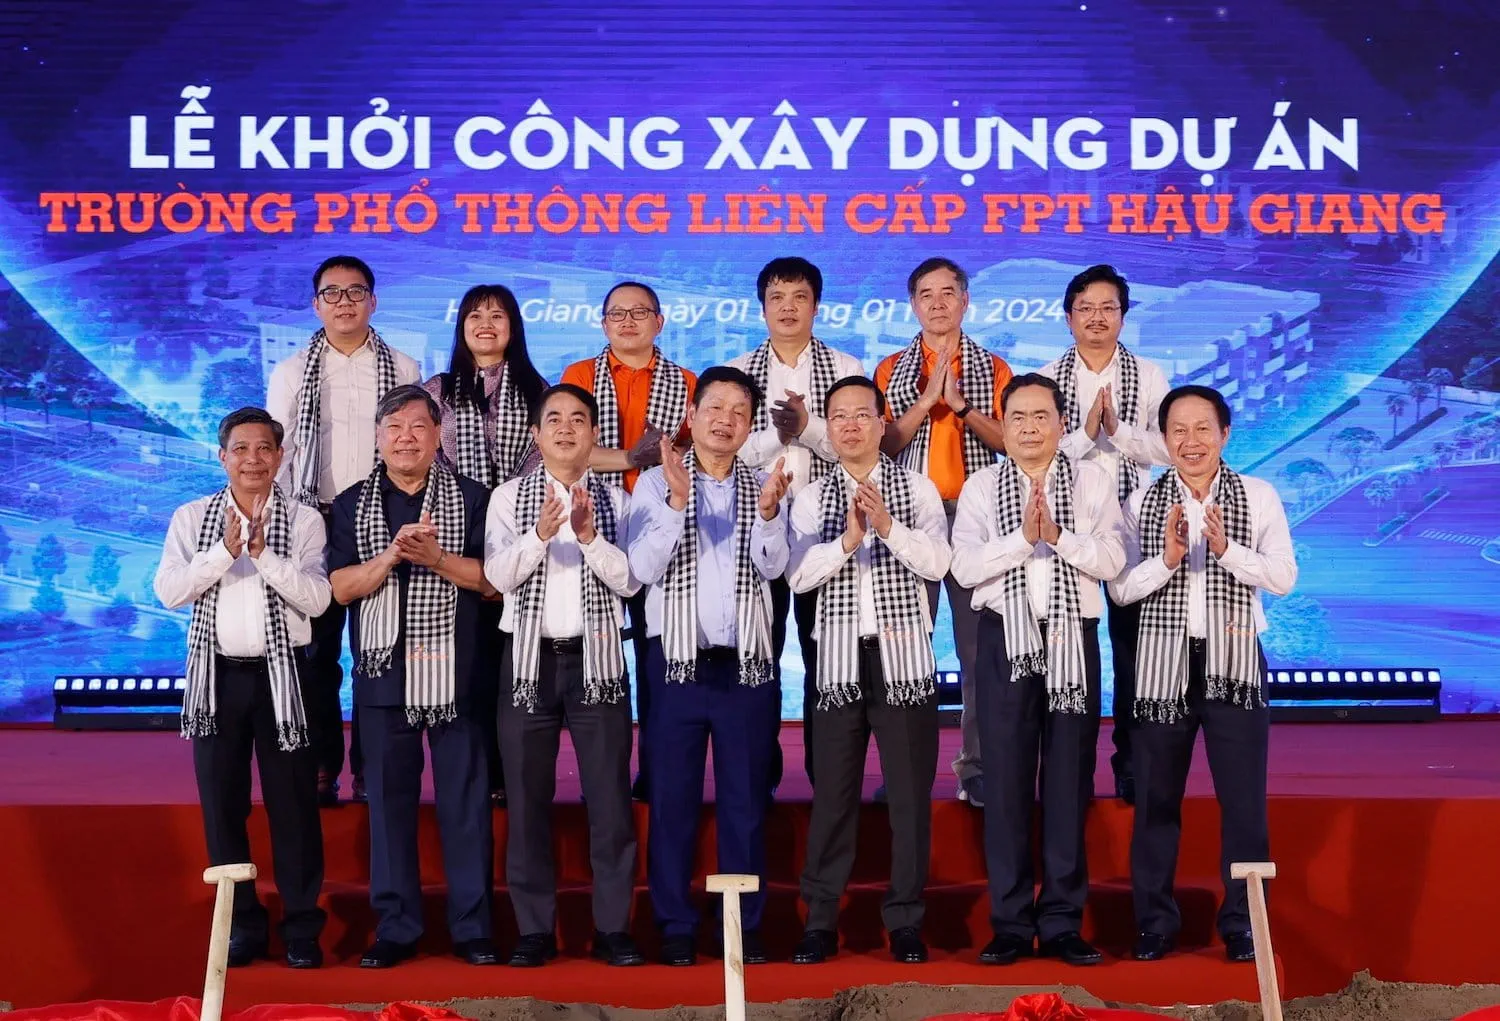 President Vo Van Thuong and the guests captured memorable moments together. (Photo source: Vietnam News Agency)